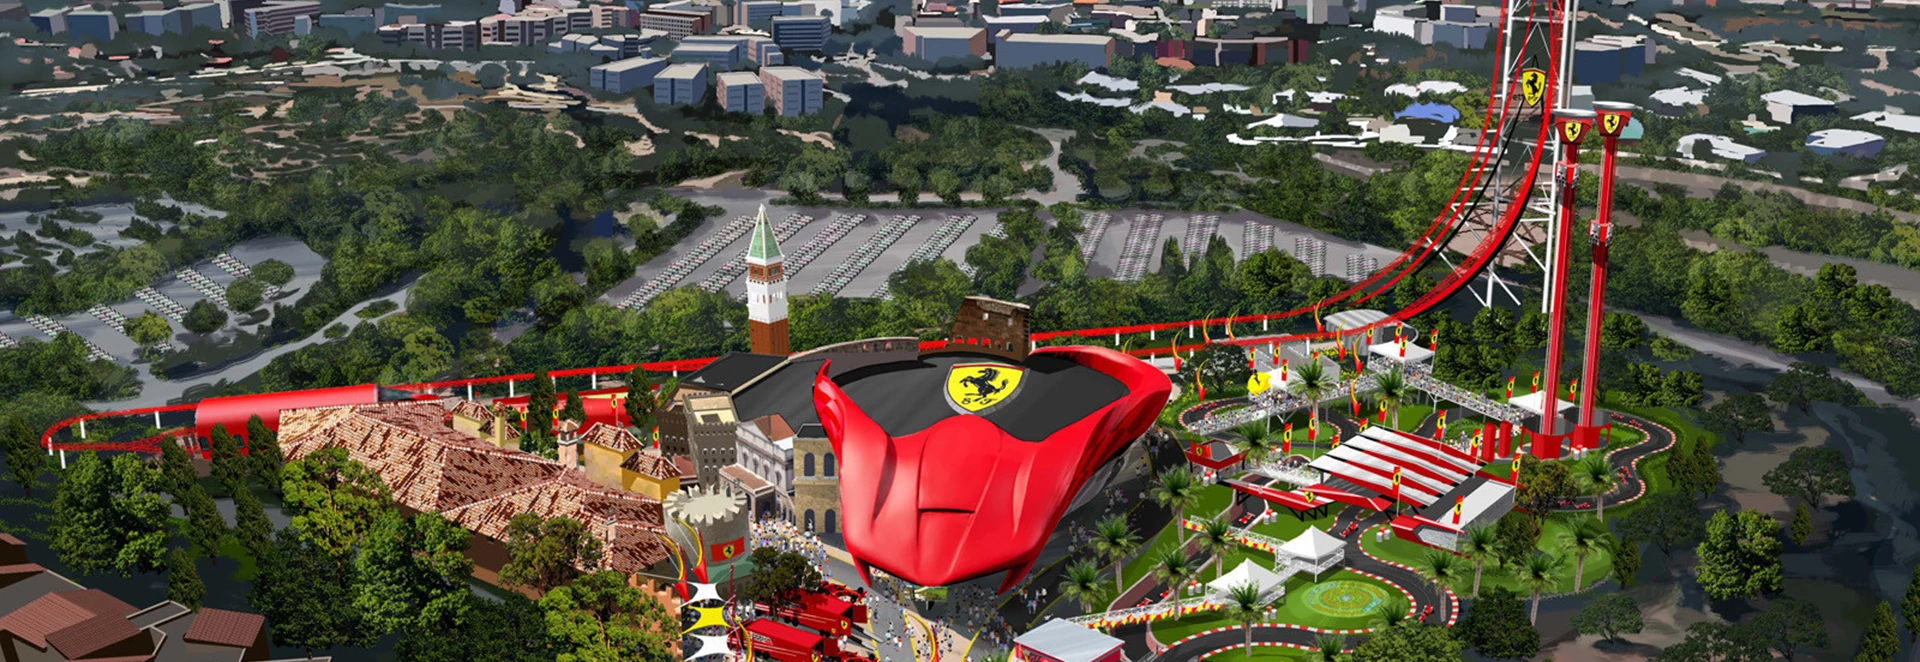 Ferrari Land Comes to Europe, and it Looks Awesome! 